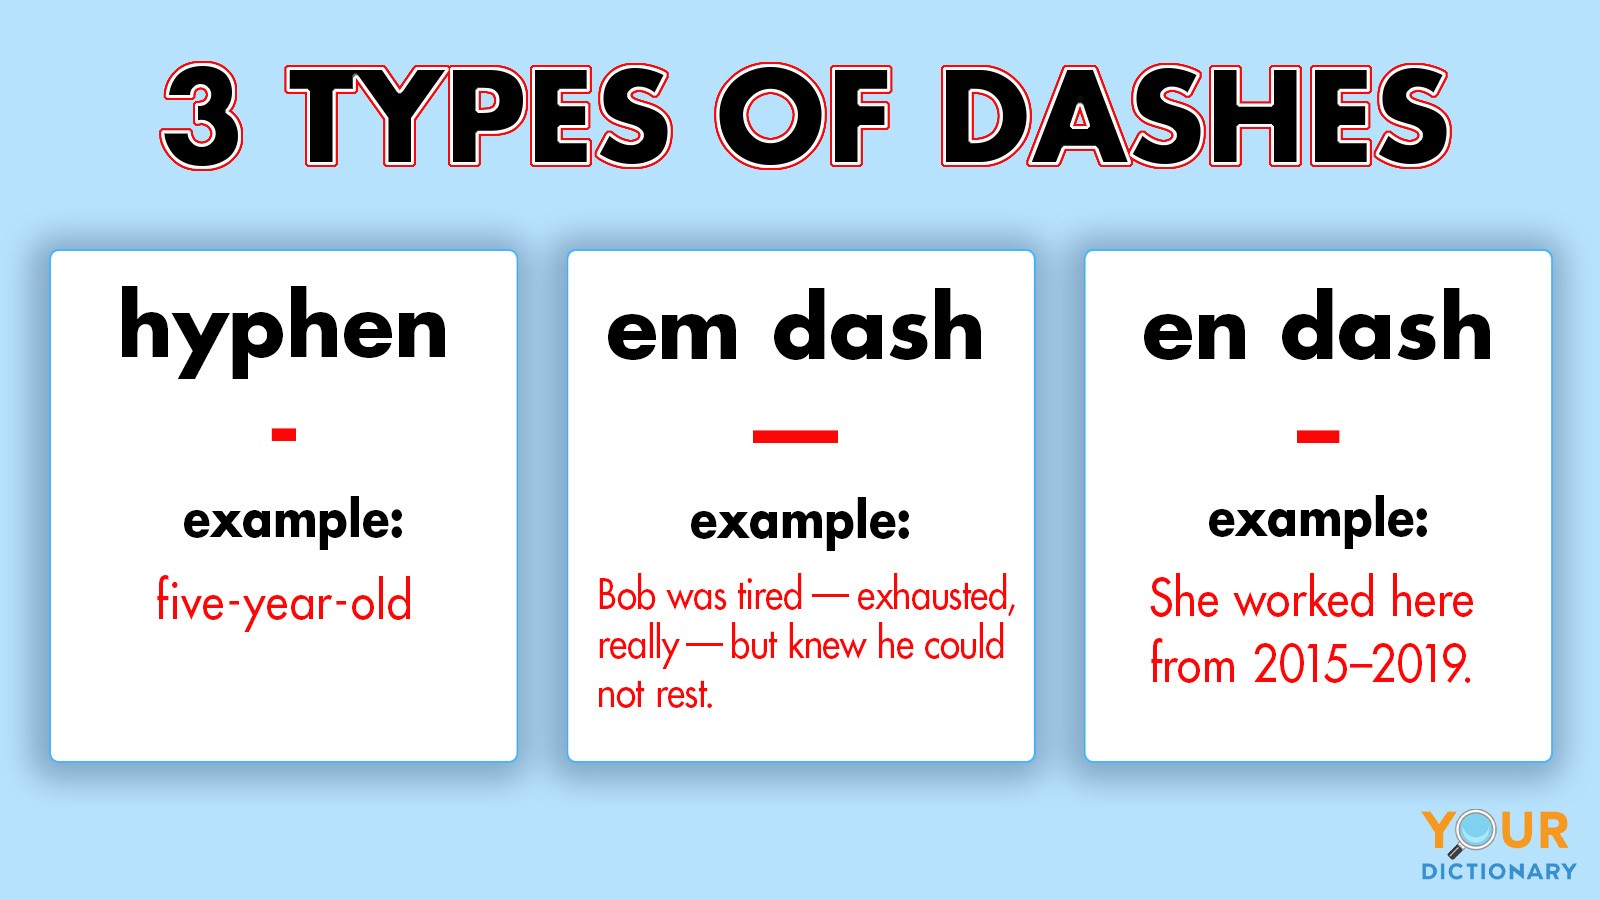 how to use dashes in an essay